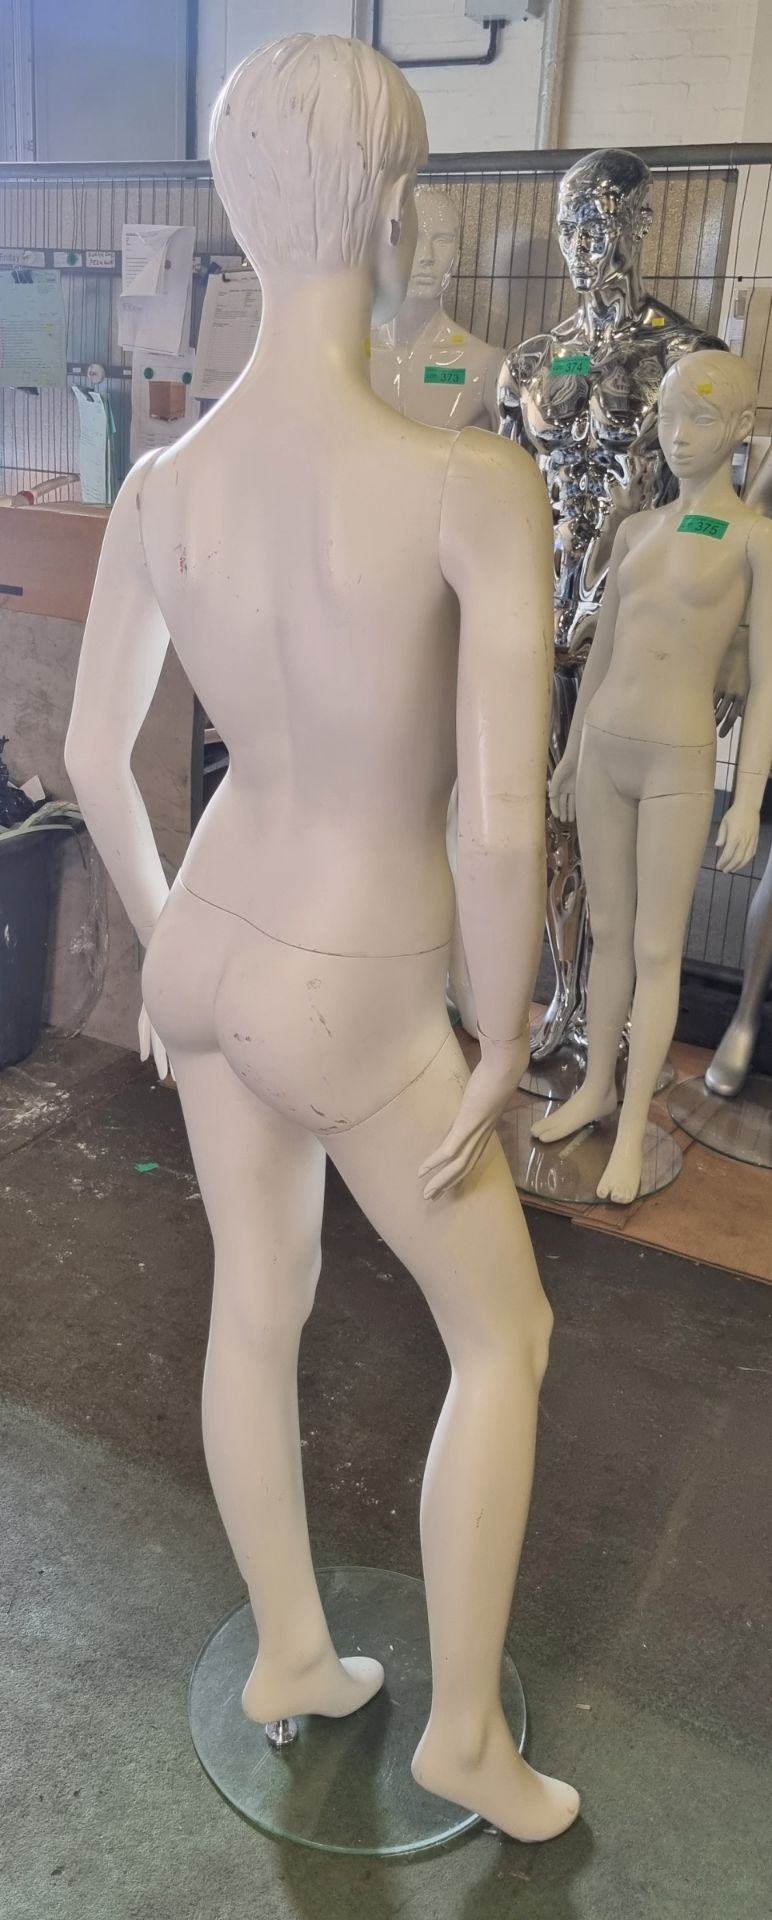 Mannequin - Female standing - Image 4 of 4